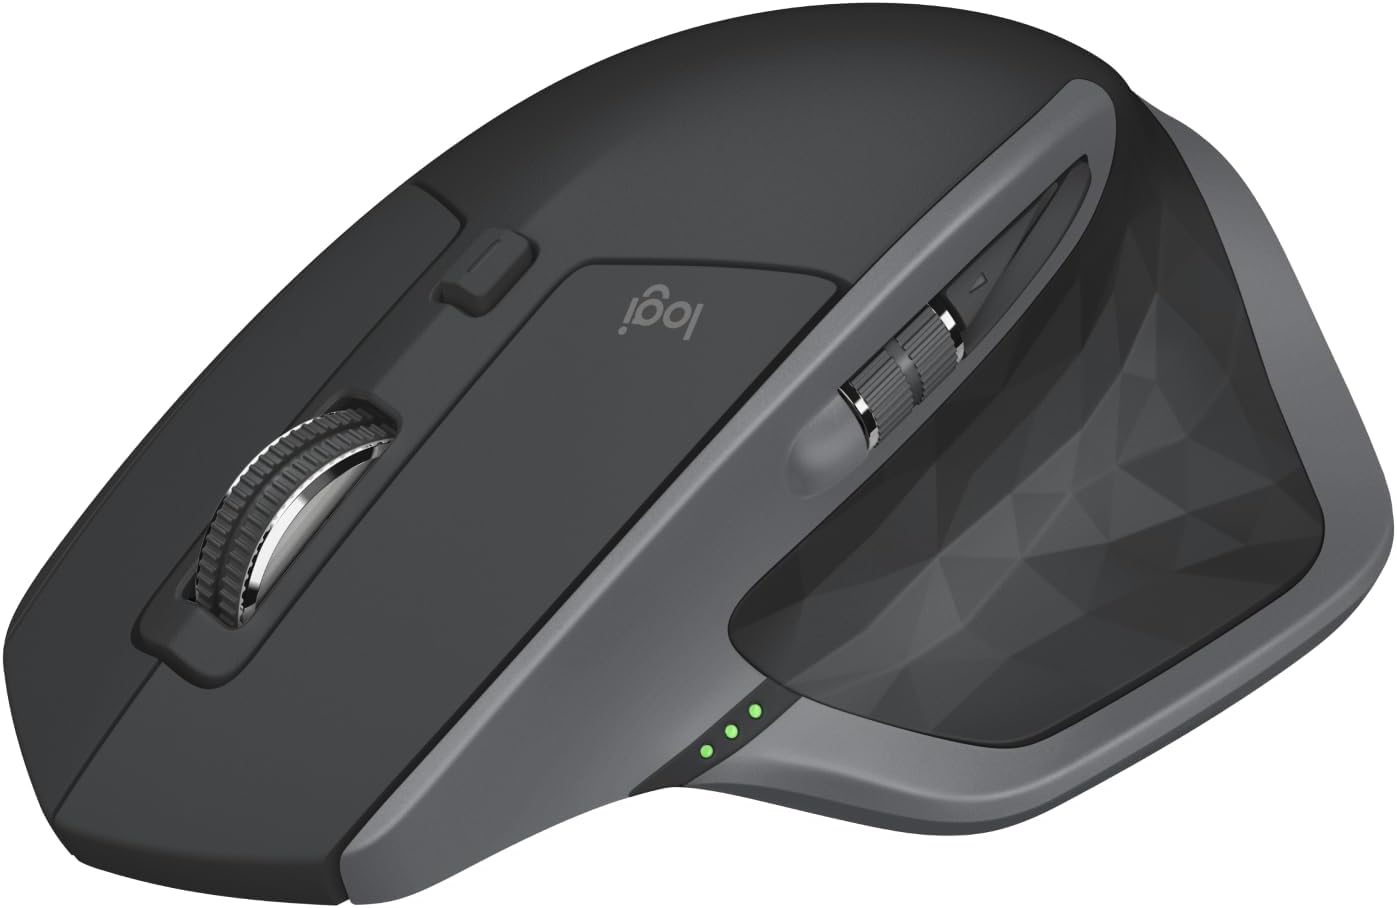 Logitech MX Master 2S Bluetooth Edition Wireless Mouse  Use on Any Surface, Hyper-Fast Scrolling, Ergonomic, Rechargeable, Control Up to 3 Apple Mac and Windows Computers - Graphite